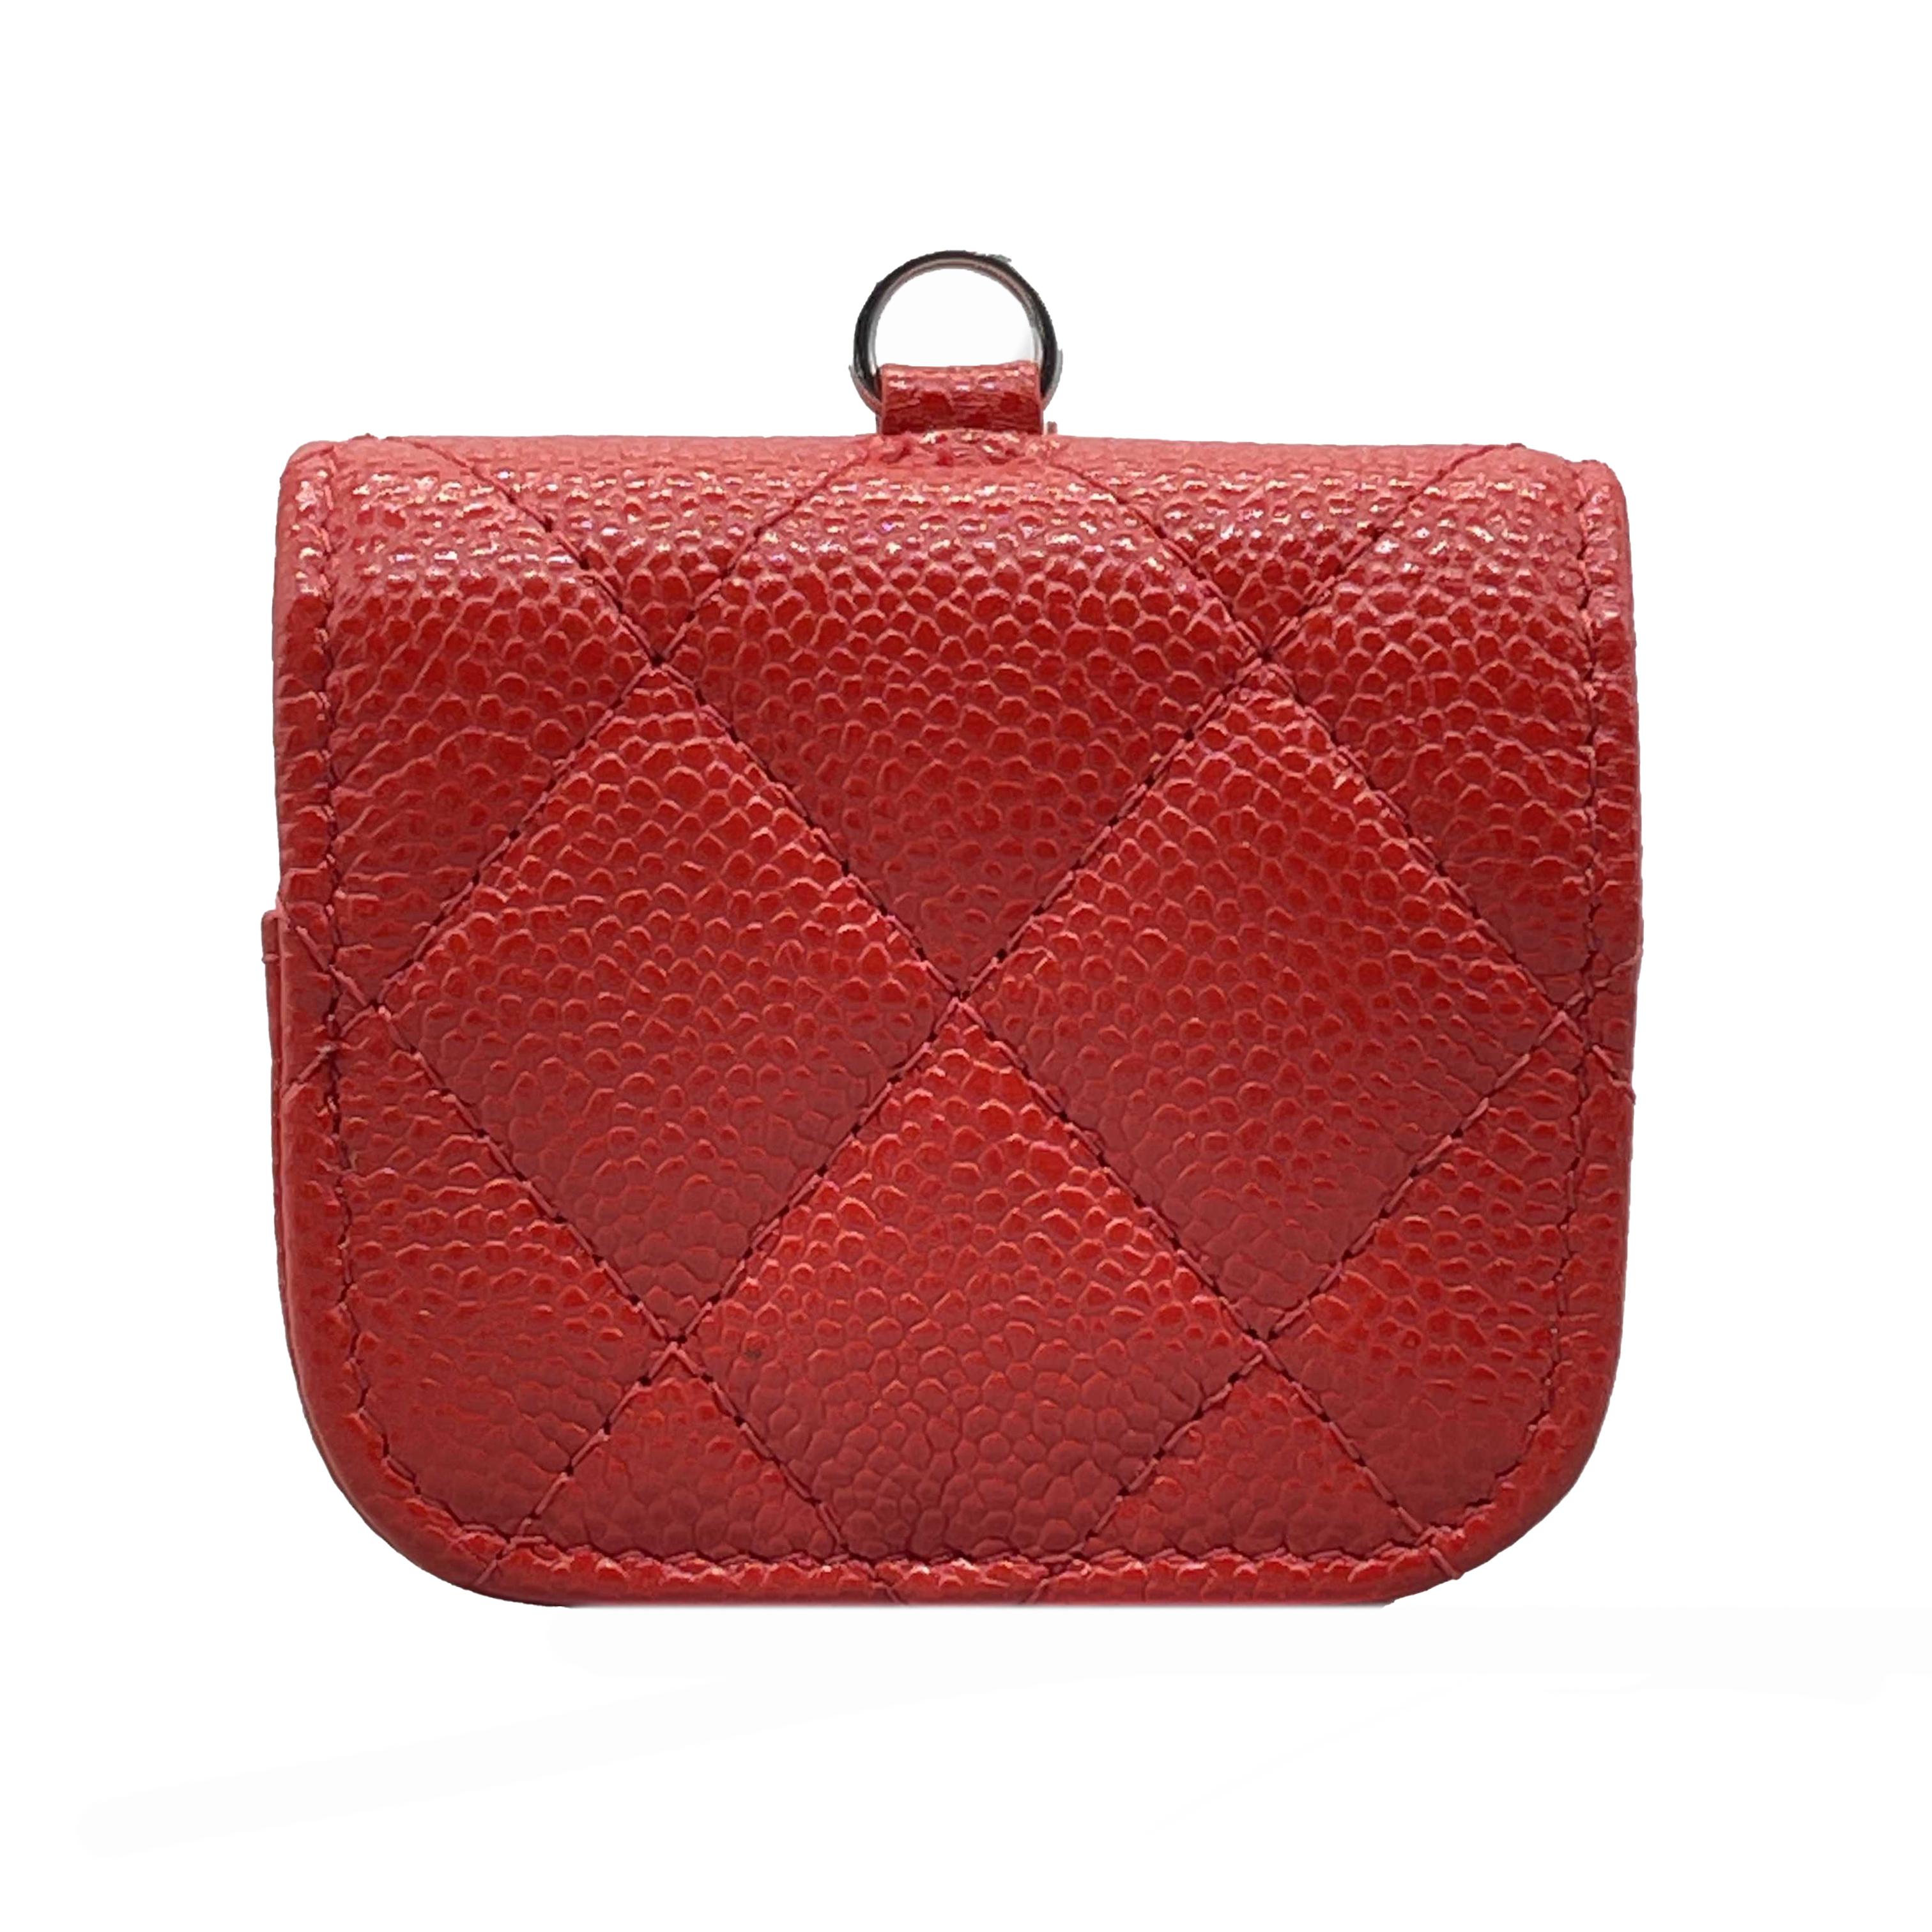 CHANEL - Pristine - Quilted Caviar Leather Airpod Pro Case/Necklace - Red, Silver-Toned Hardware - Accessories

Description

This Chanel Airpod Pro case/necklace is from the 2020-2021 collection.
It's crafted with quilted stitched caviar leather and